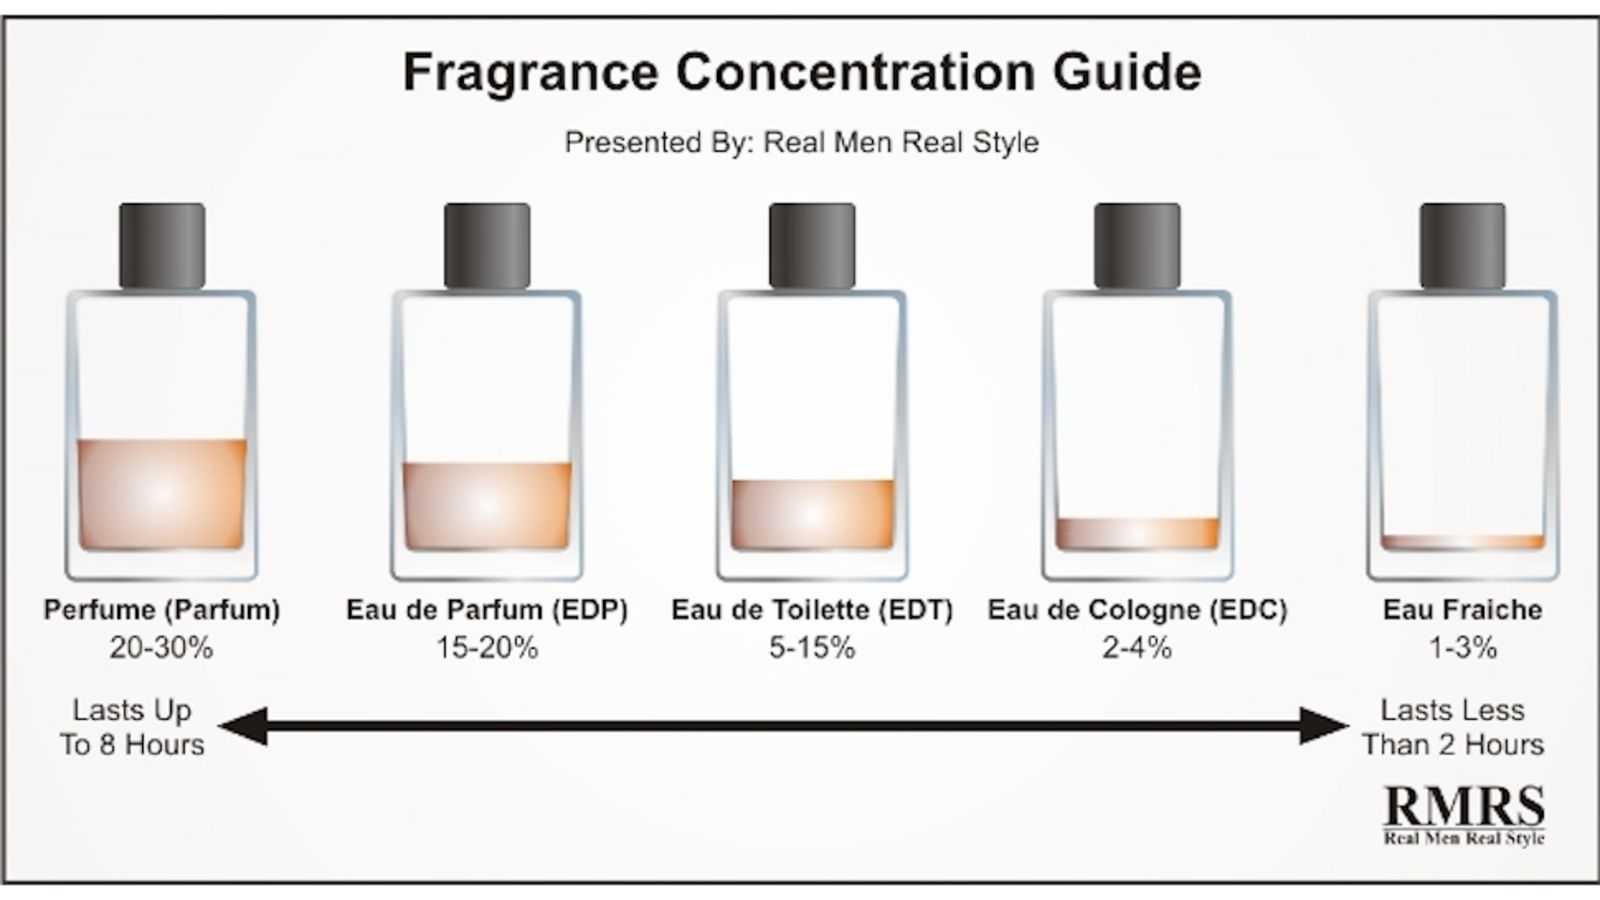 What Is the difference between perfume 